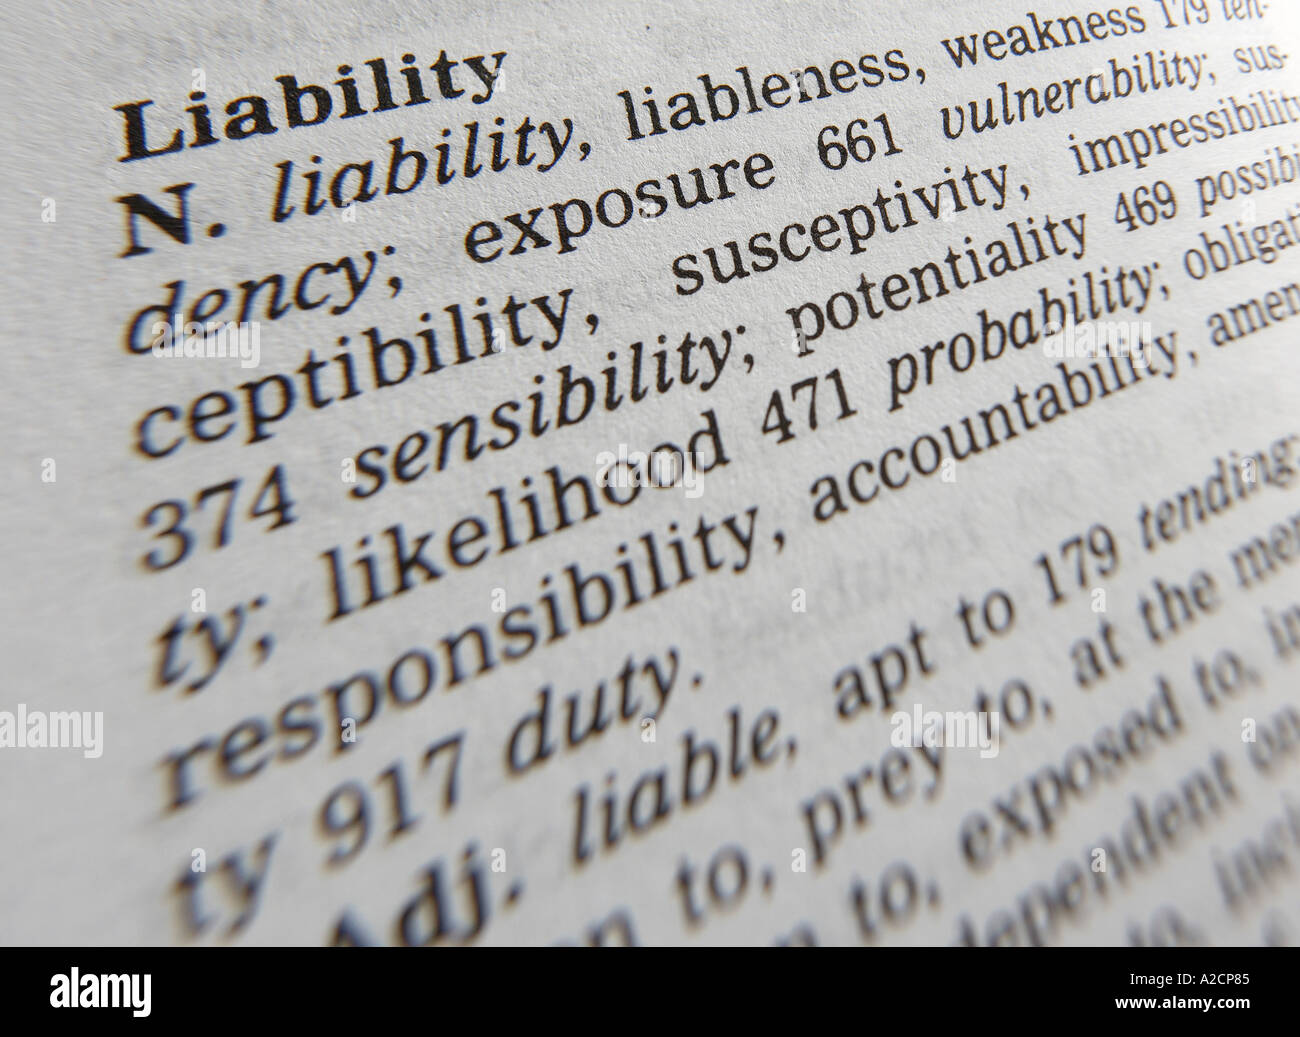 THESAURUS PAGE SHOWING DEFINITION OF WORD LIABILITY Stock Photo